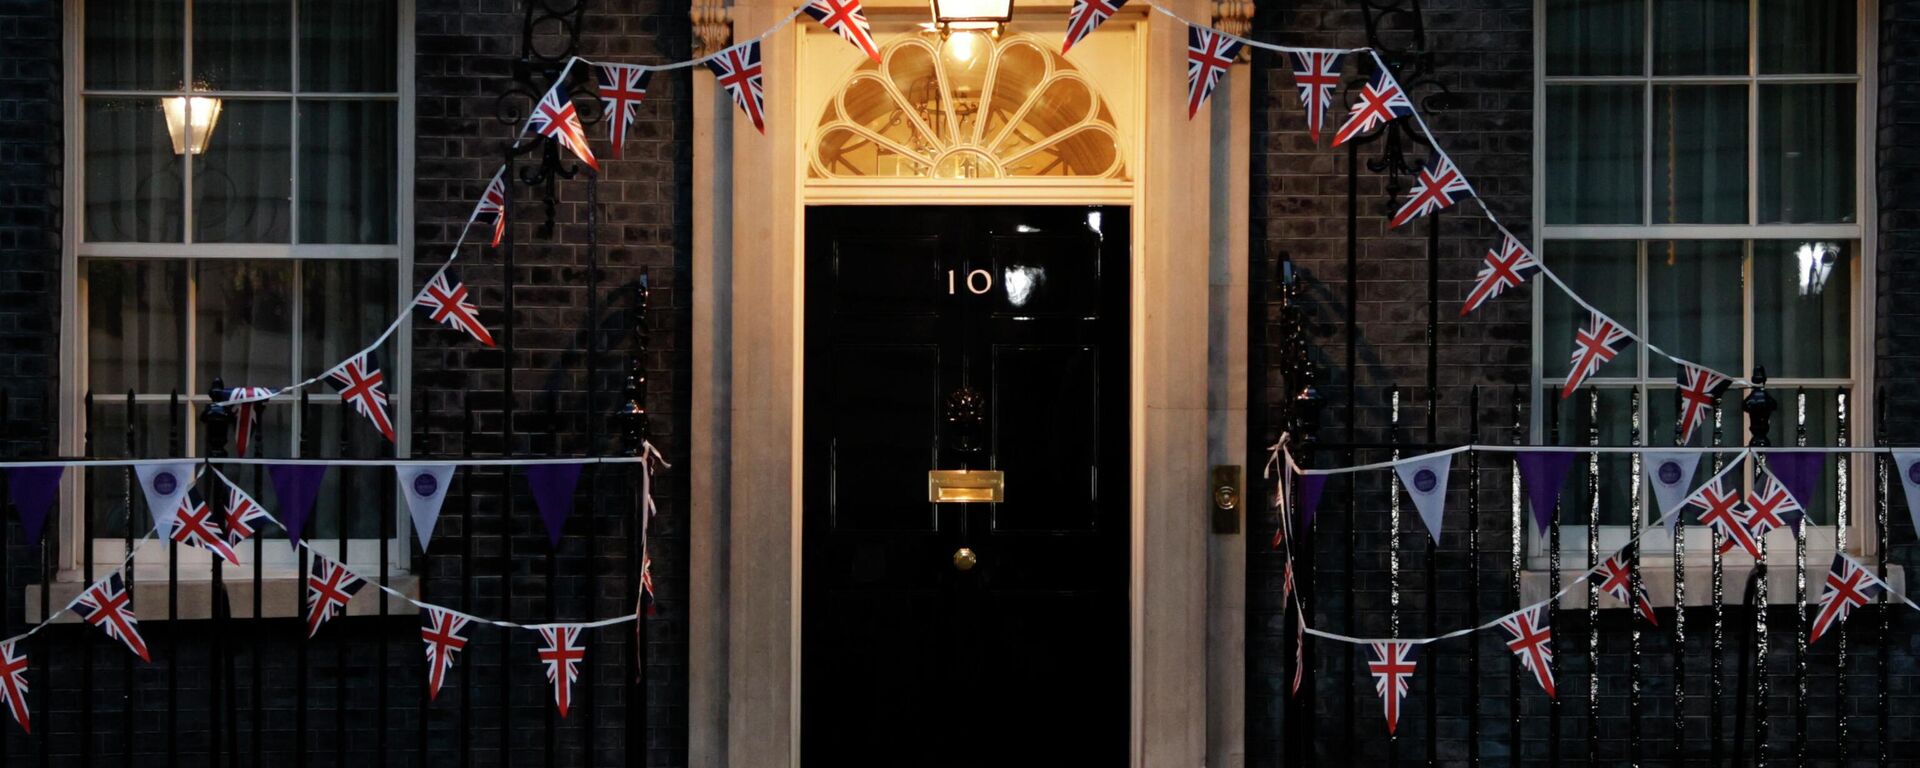 A general view at dusk of 10 Downing Street in London, Monday, June 6, 2022. British Prime Minister Boris Johnson survived a no-confidence vote on Monday, securing enough support from his Conservative Party to remain in office despite a rebellion that leaves him a weakened leader with an uncertain future. - Sputnik International, 1920, 20.10.2022